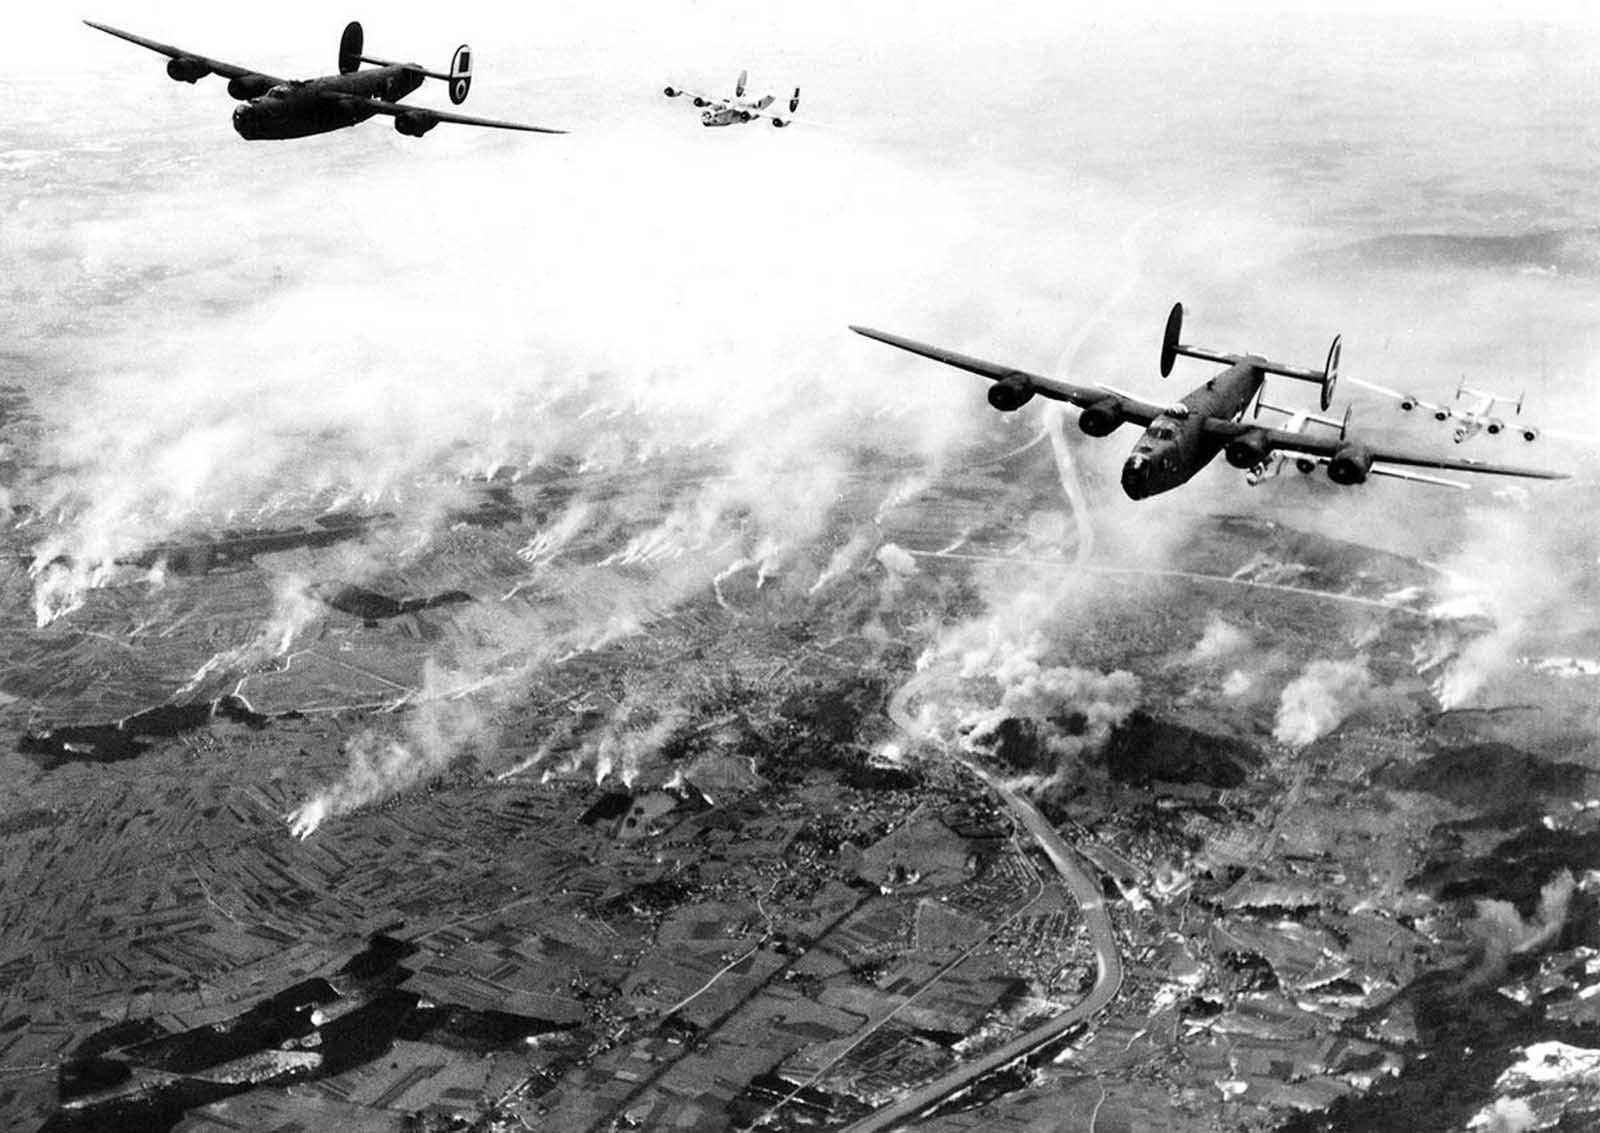 A formation of B-24s of Maj. General Nathan F. Twining’s U.S. Army 15th Air Force thunders over the railway yards of Salzburg, Austria, on December 27, 1944. The smoke created by their bombs mingles with that from the enemy’s many smudge pots.